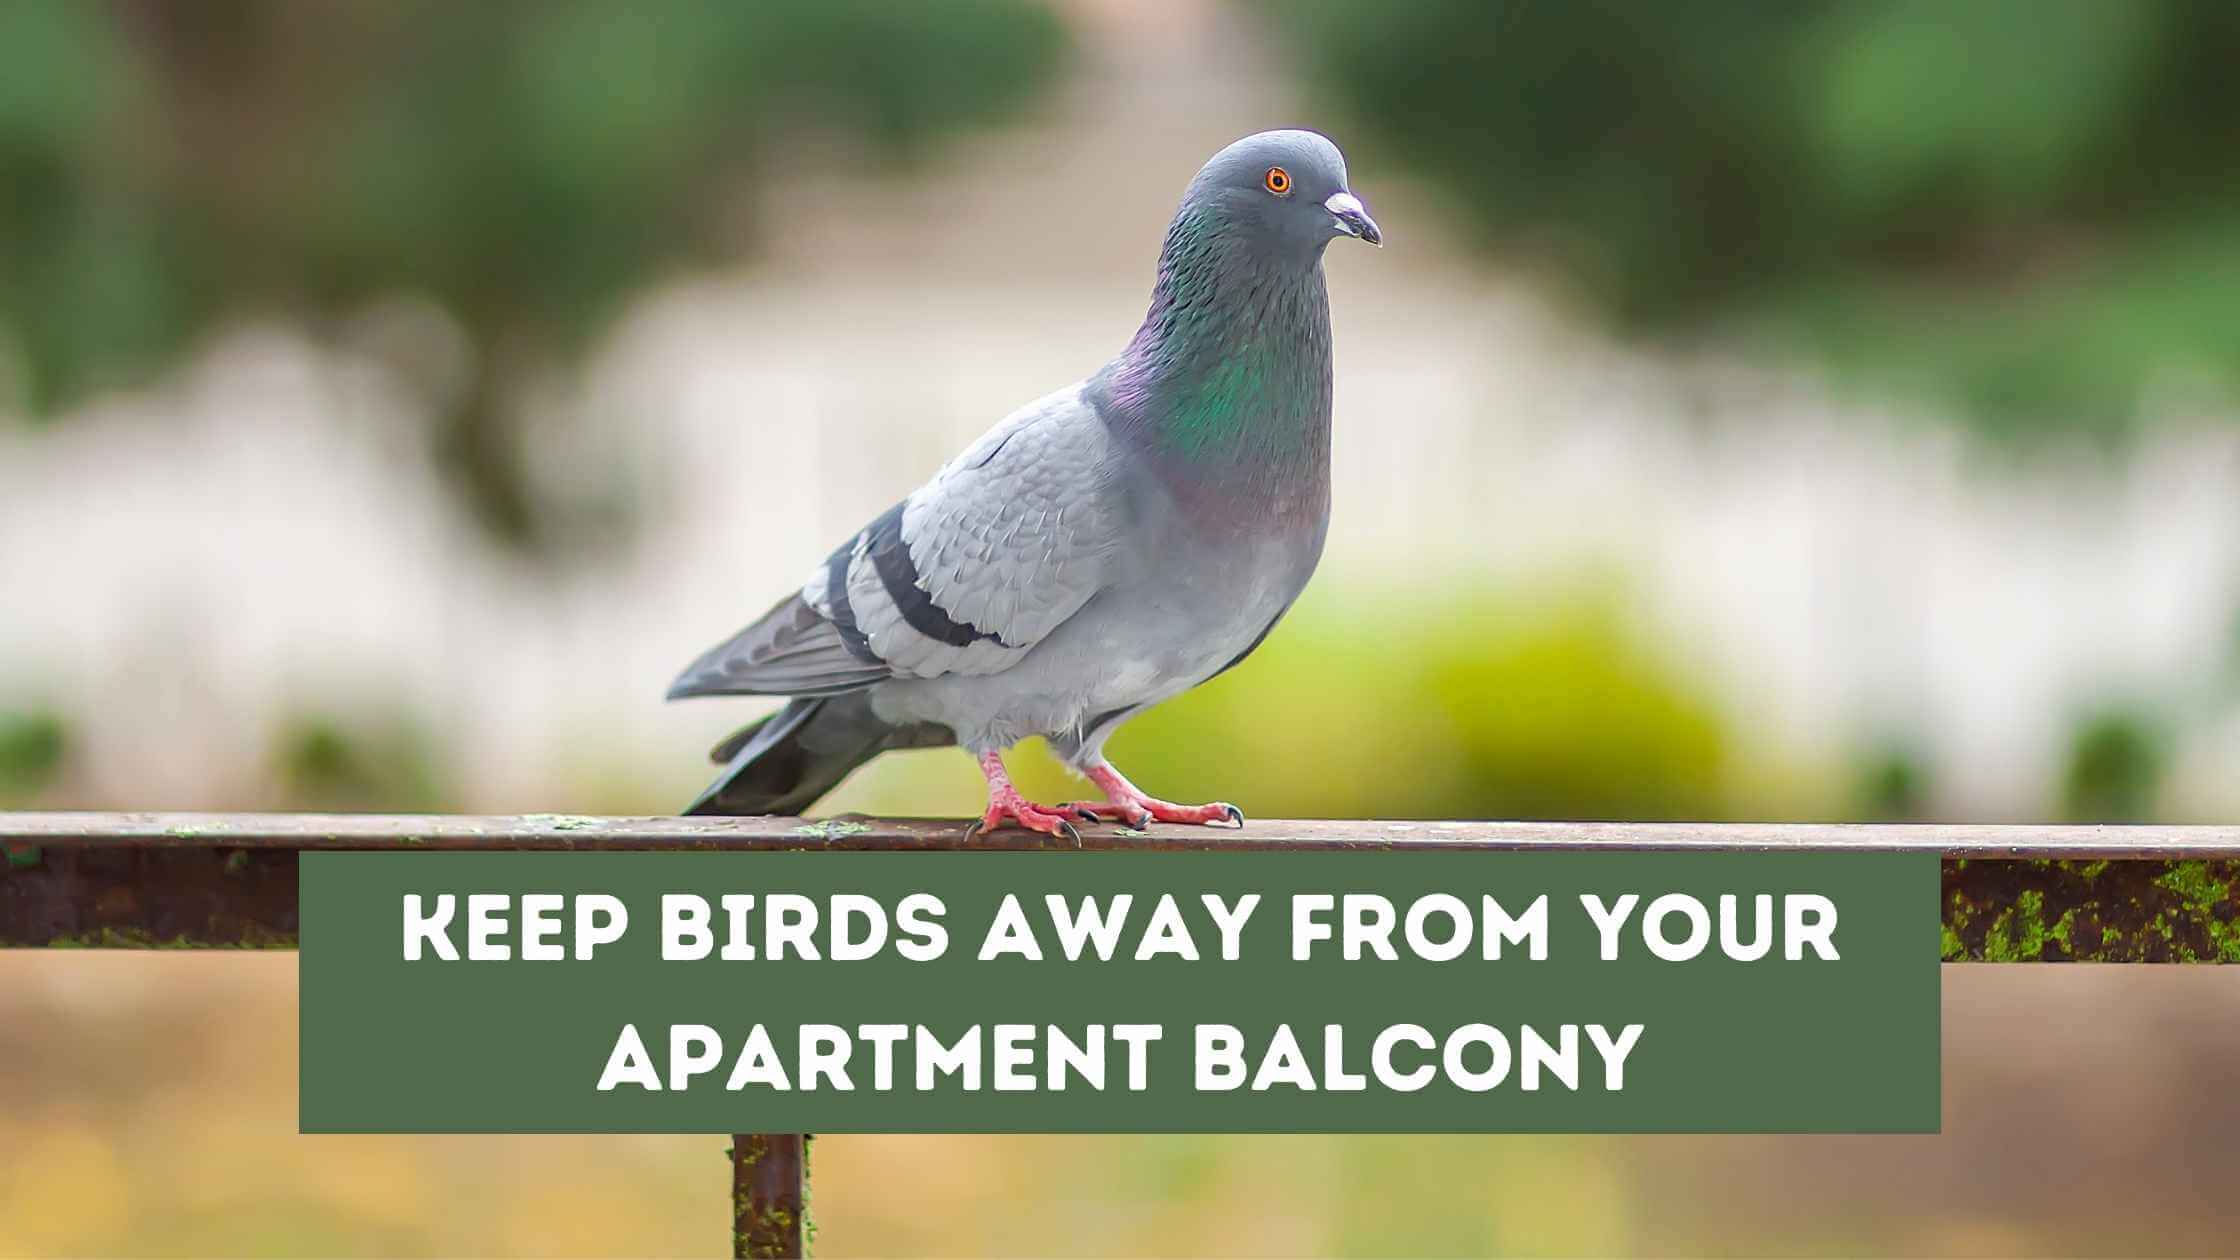 Keep Birds Away from Your Apartment Balcony